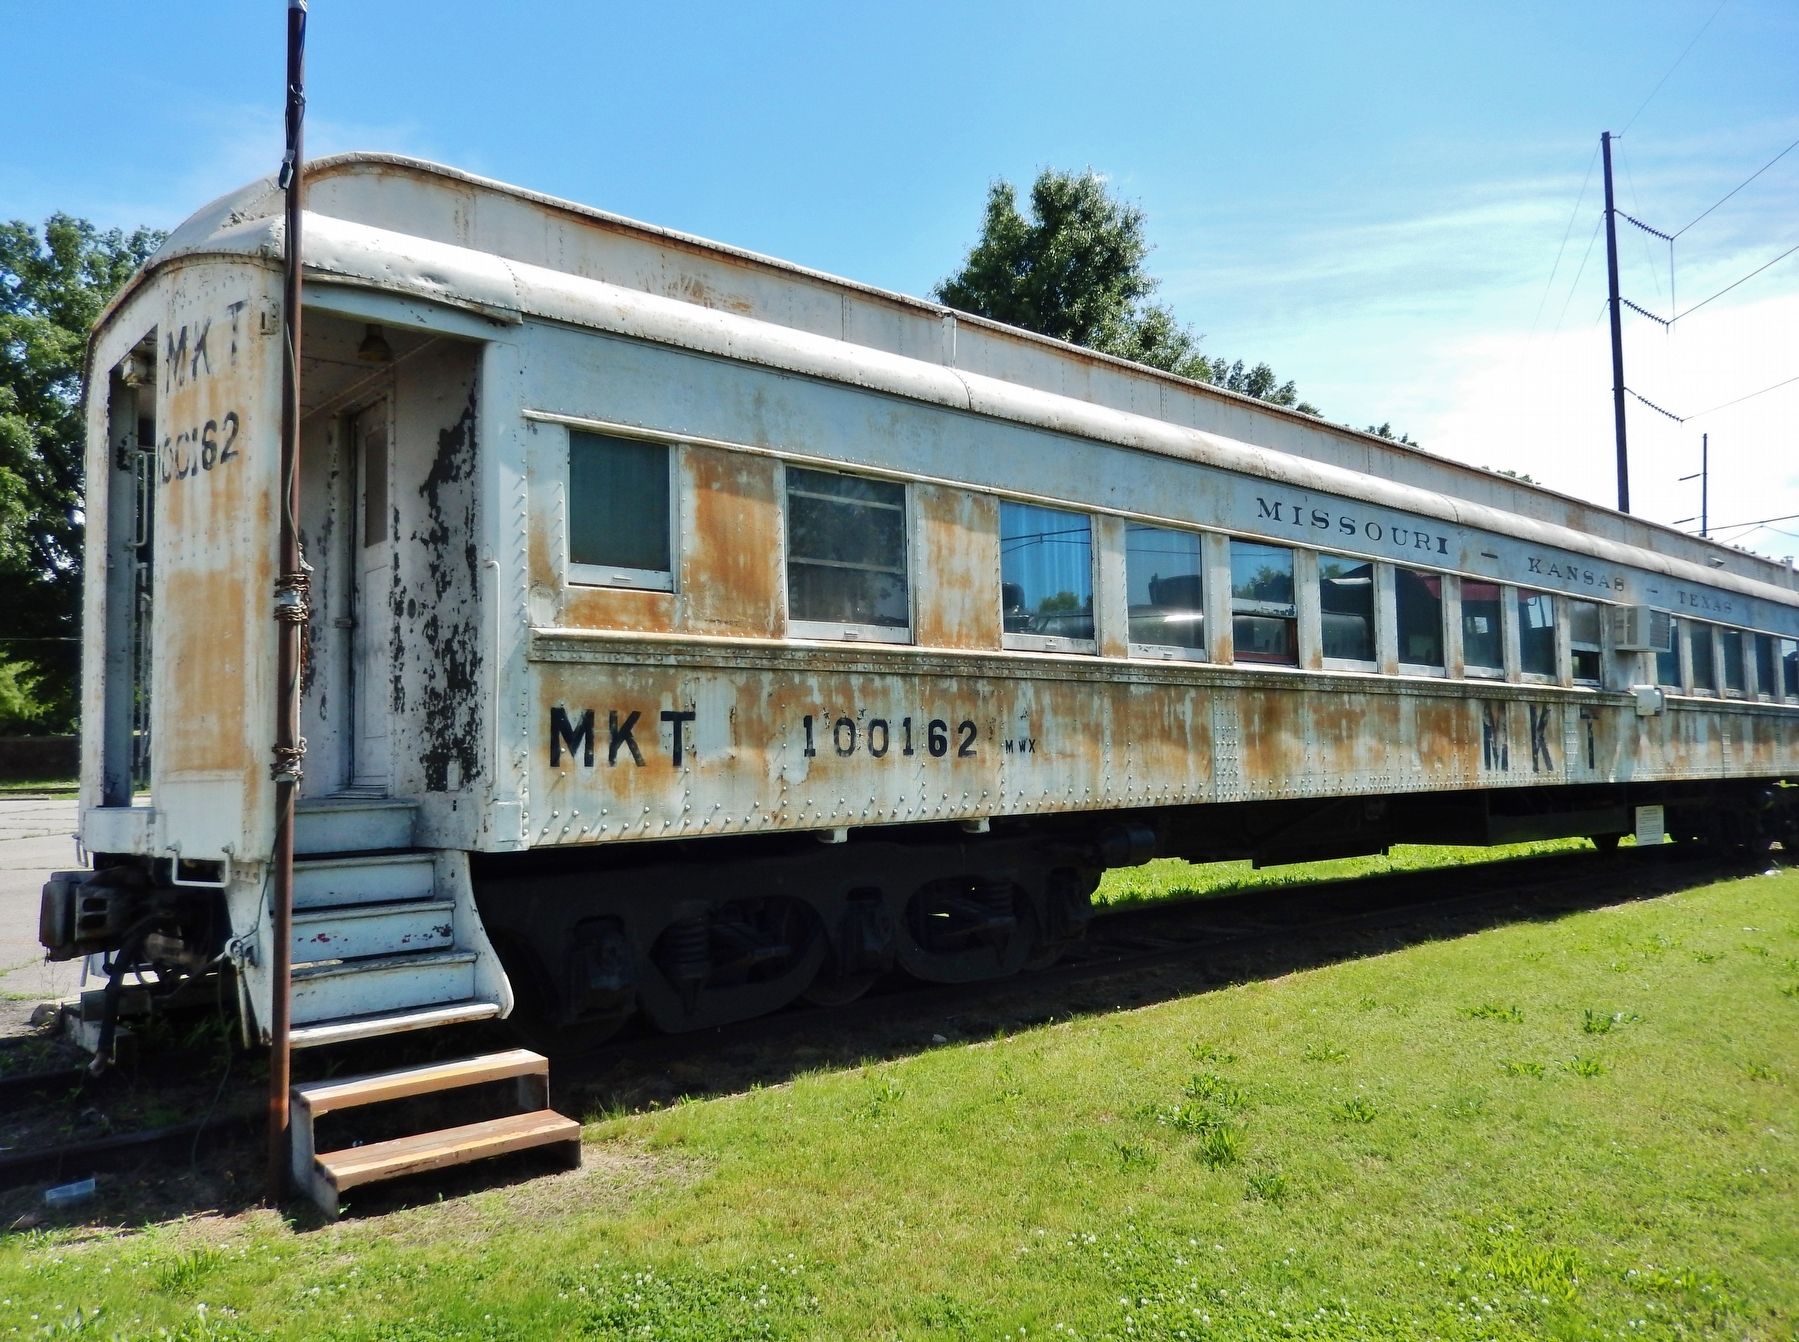 Missouri Kansas and Texas 100162 Diner Bunk Car image. Click for full size.